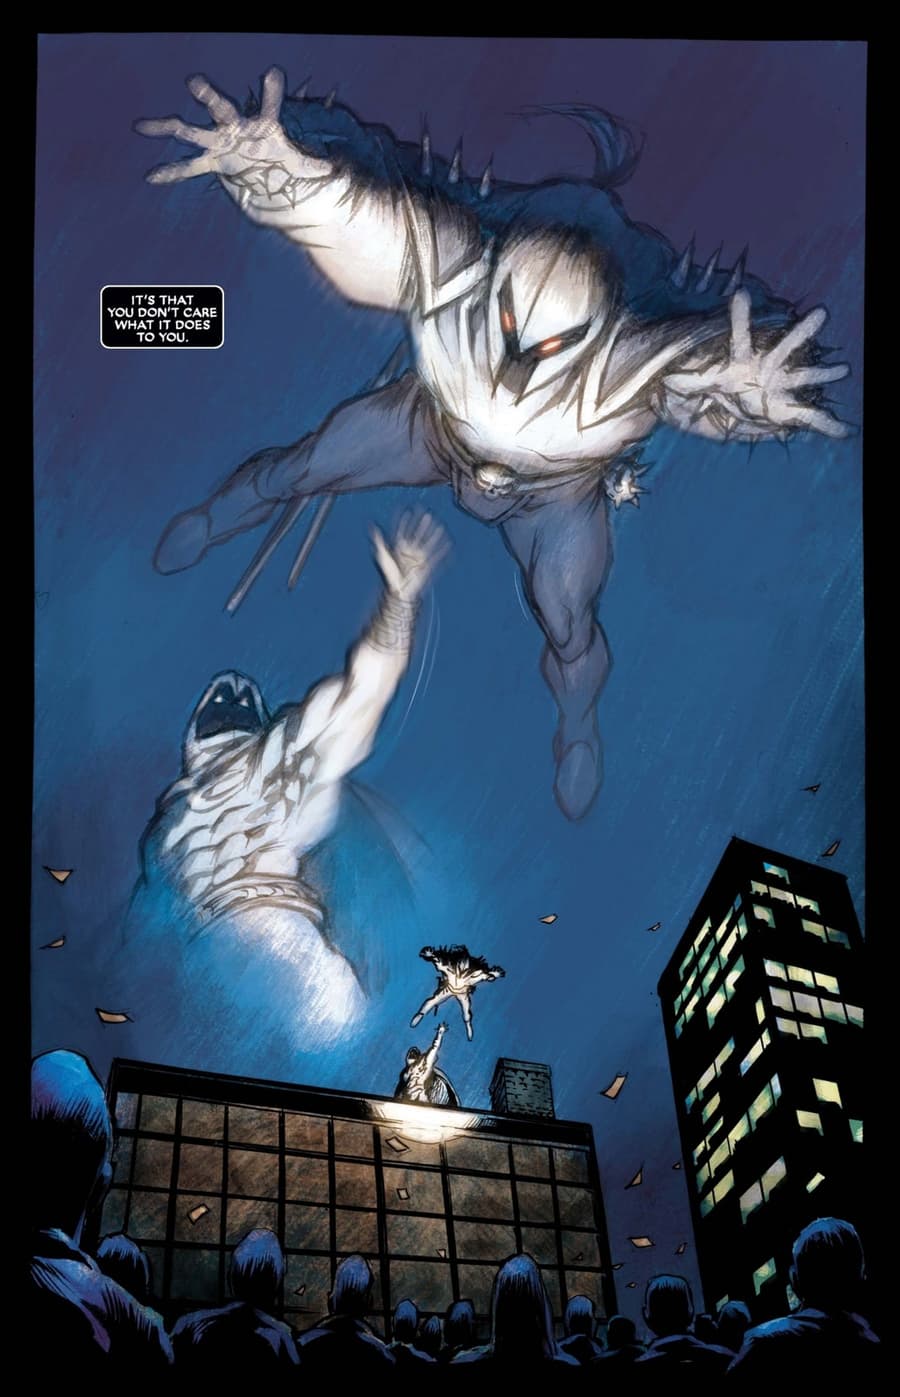 MOON KNIGHT (2006) #19 page by Mike Benson, Charlie Huston, and Mark Texeira